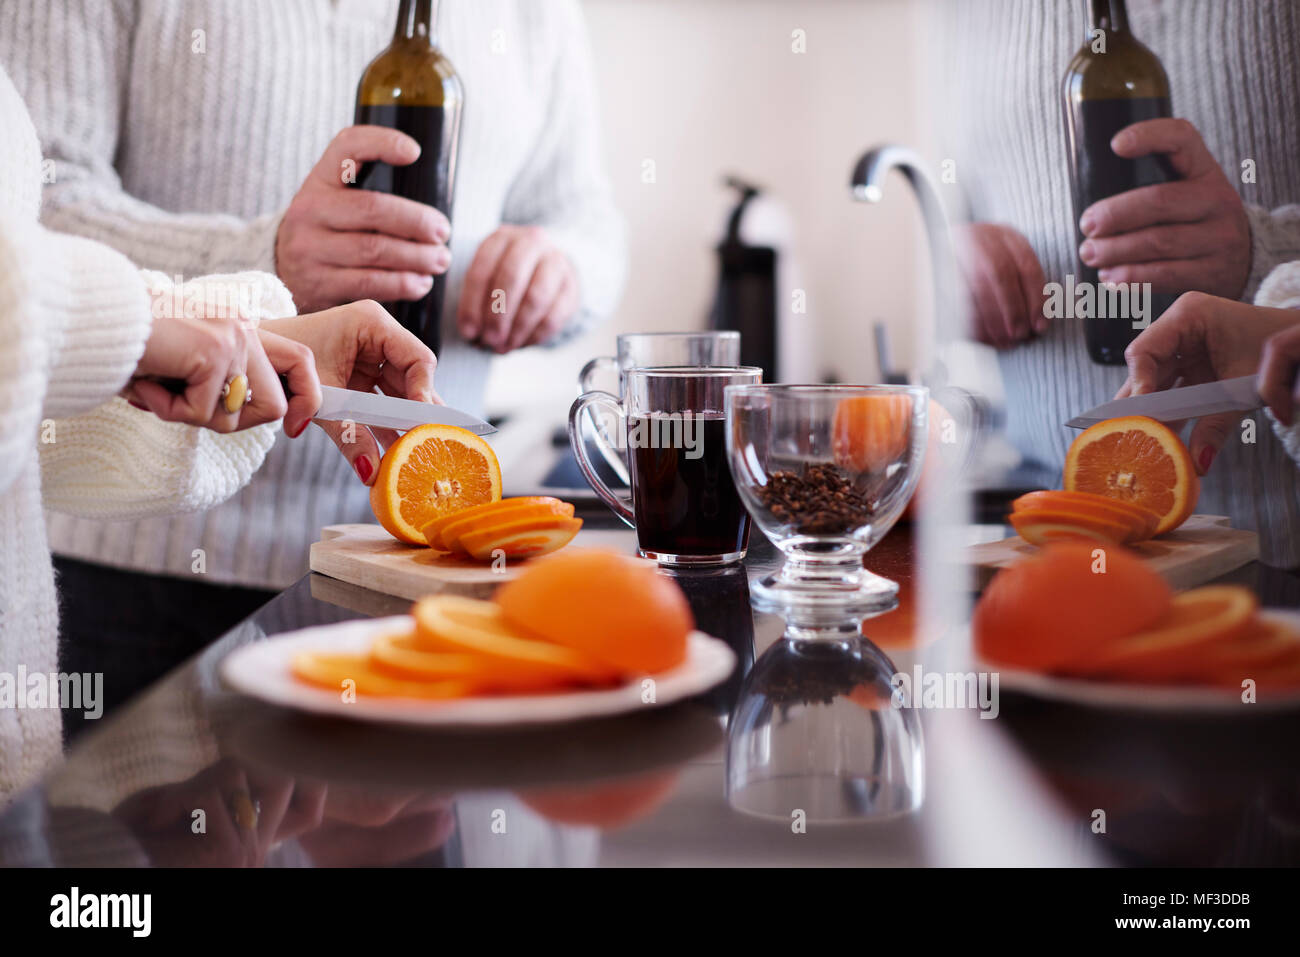 Woman slicing an orange for mulled wine Stock Photo